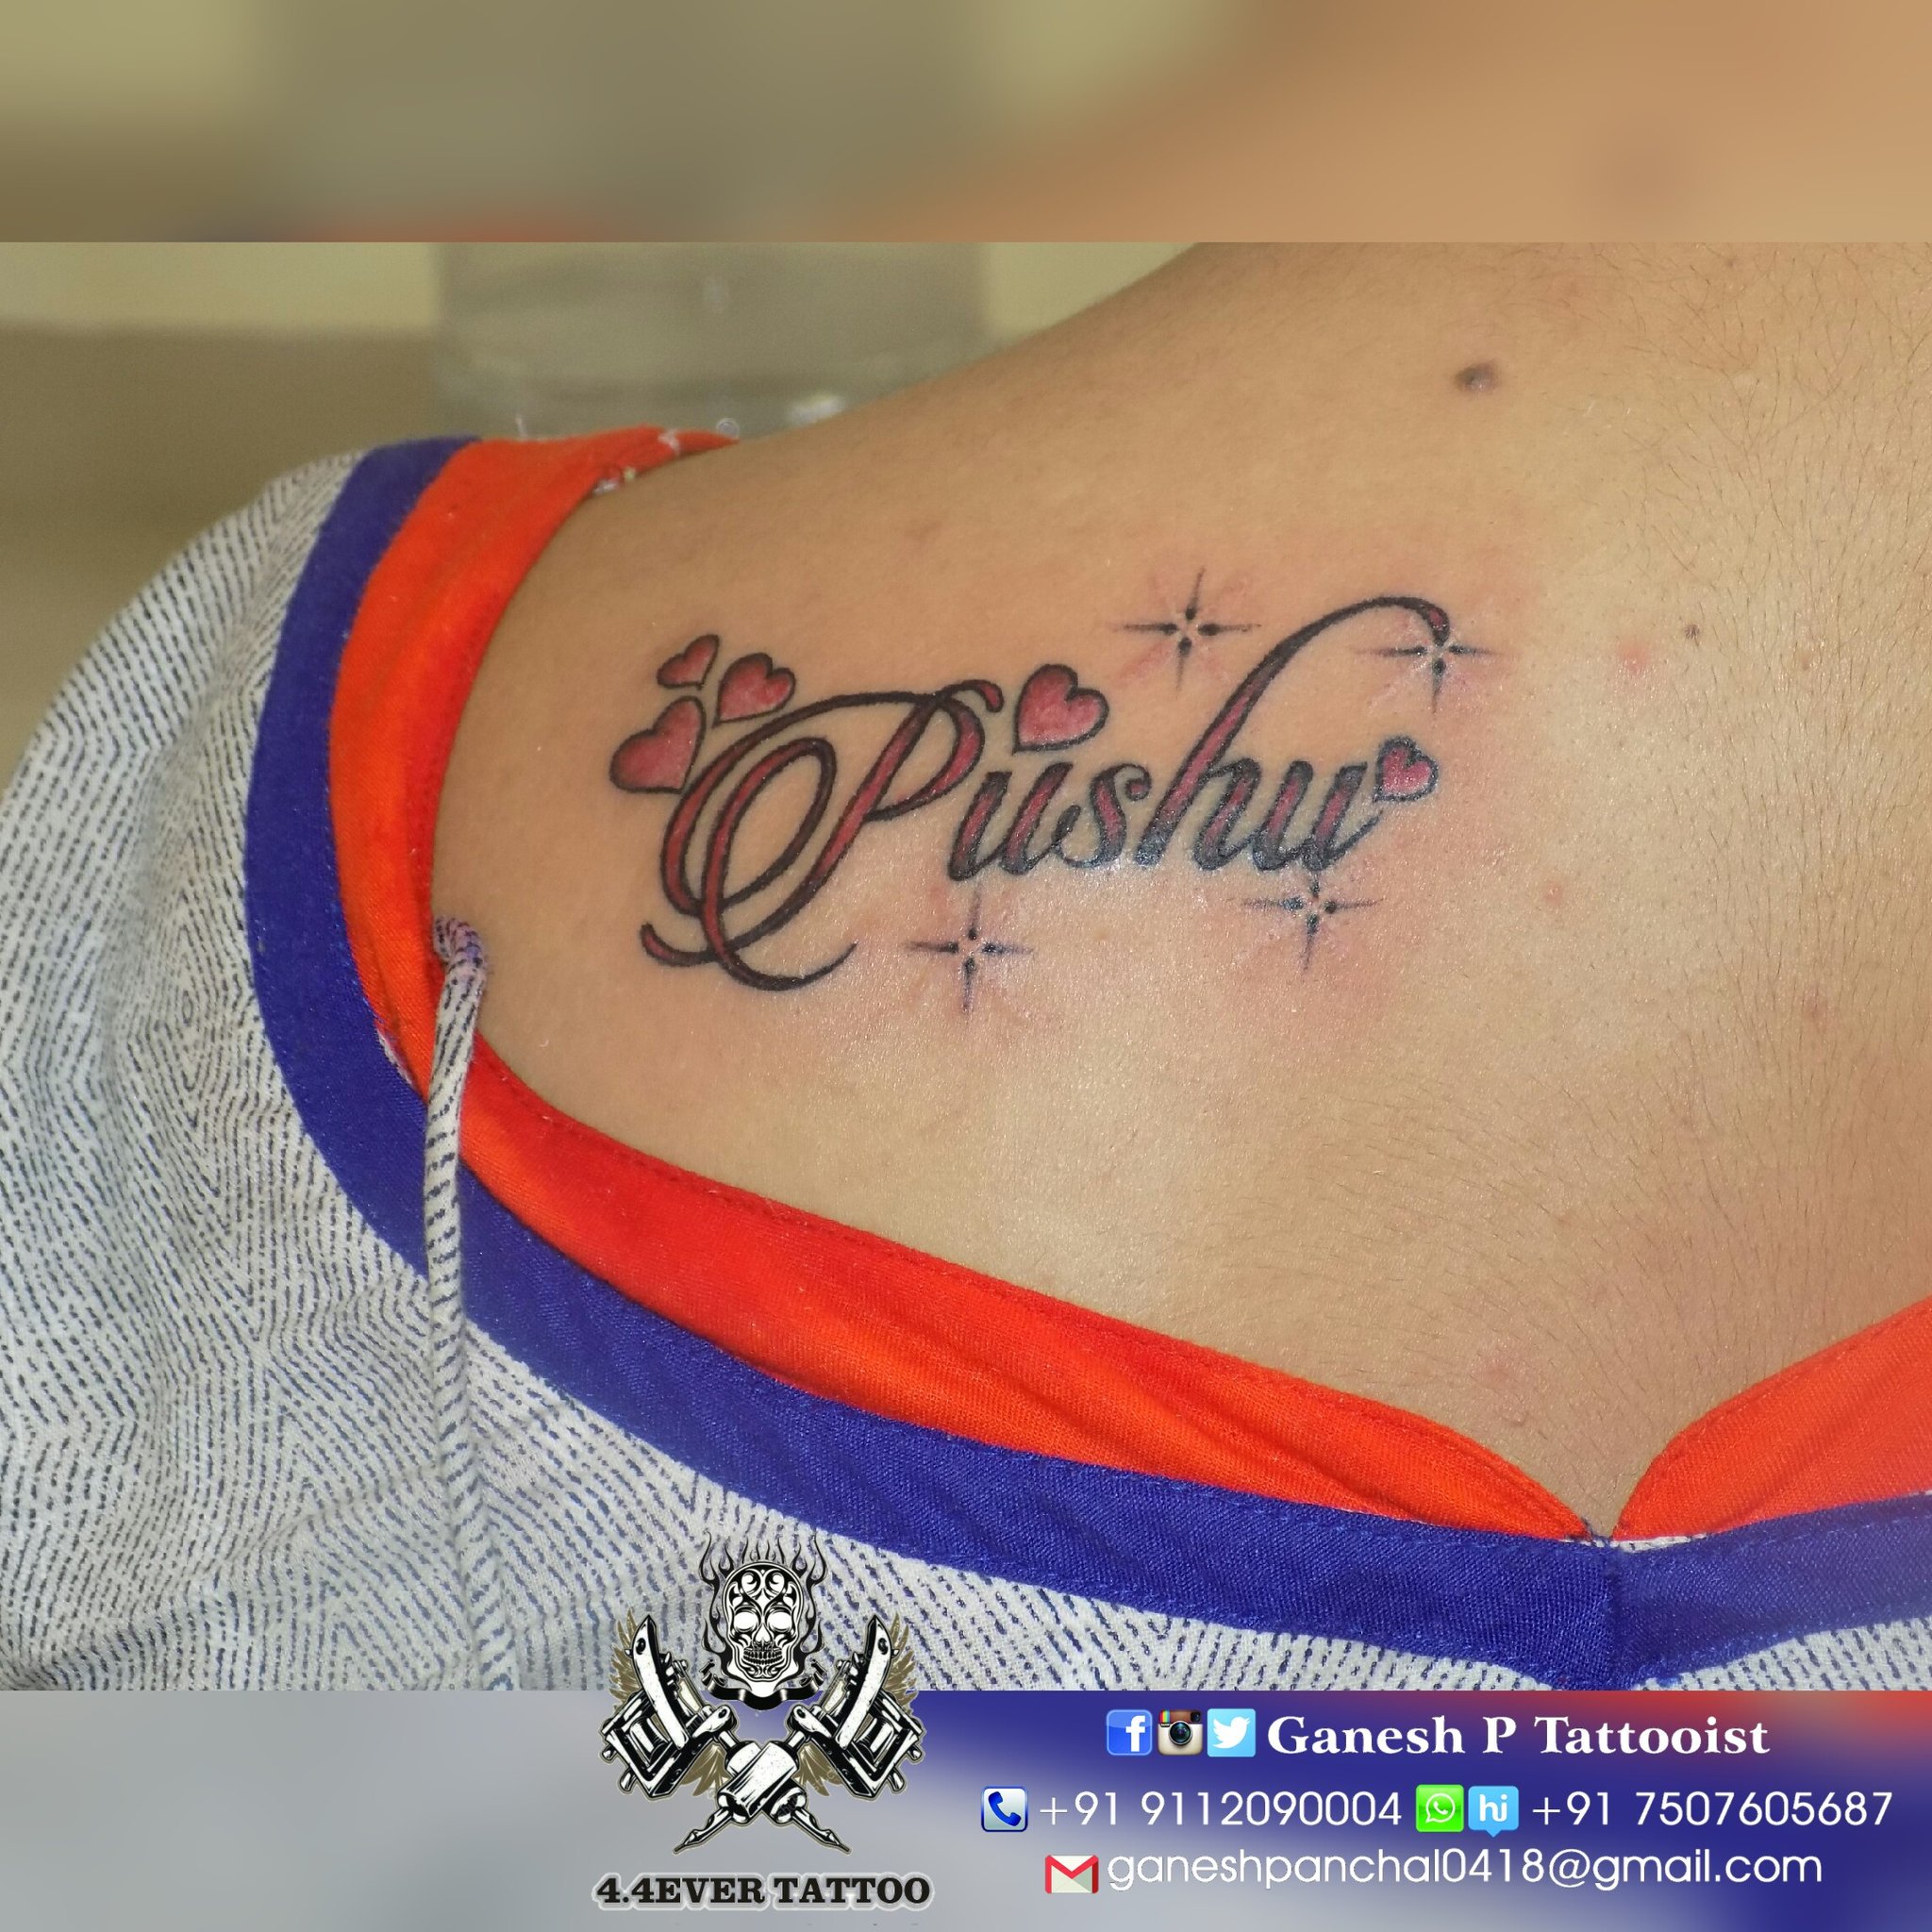 Aggregate 75 about lalit name tattoo unmissable  indaotaonec